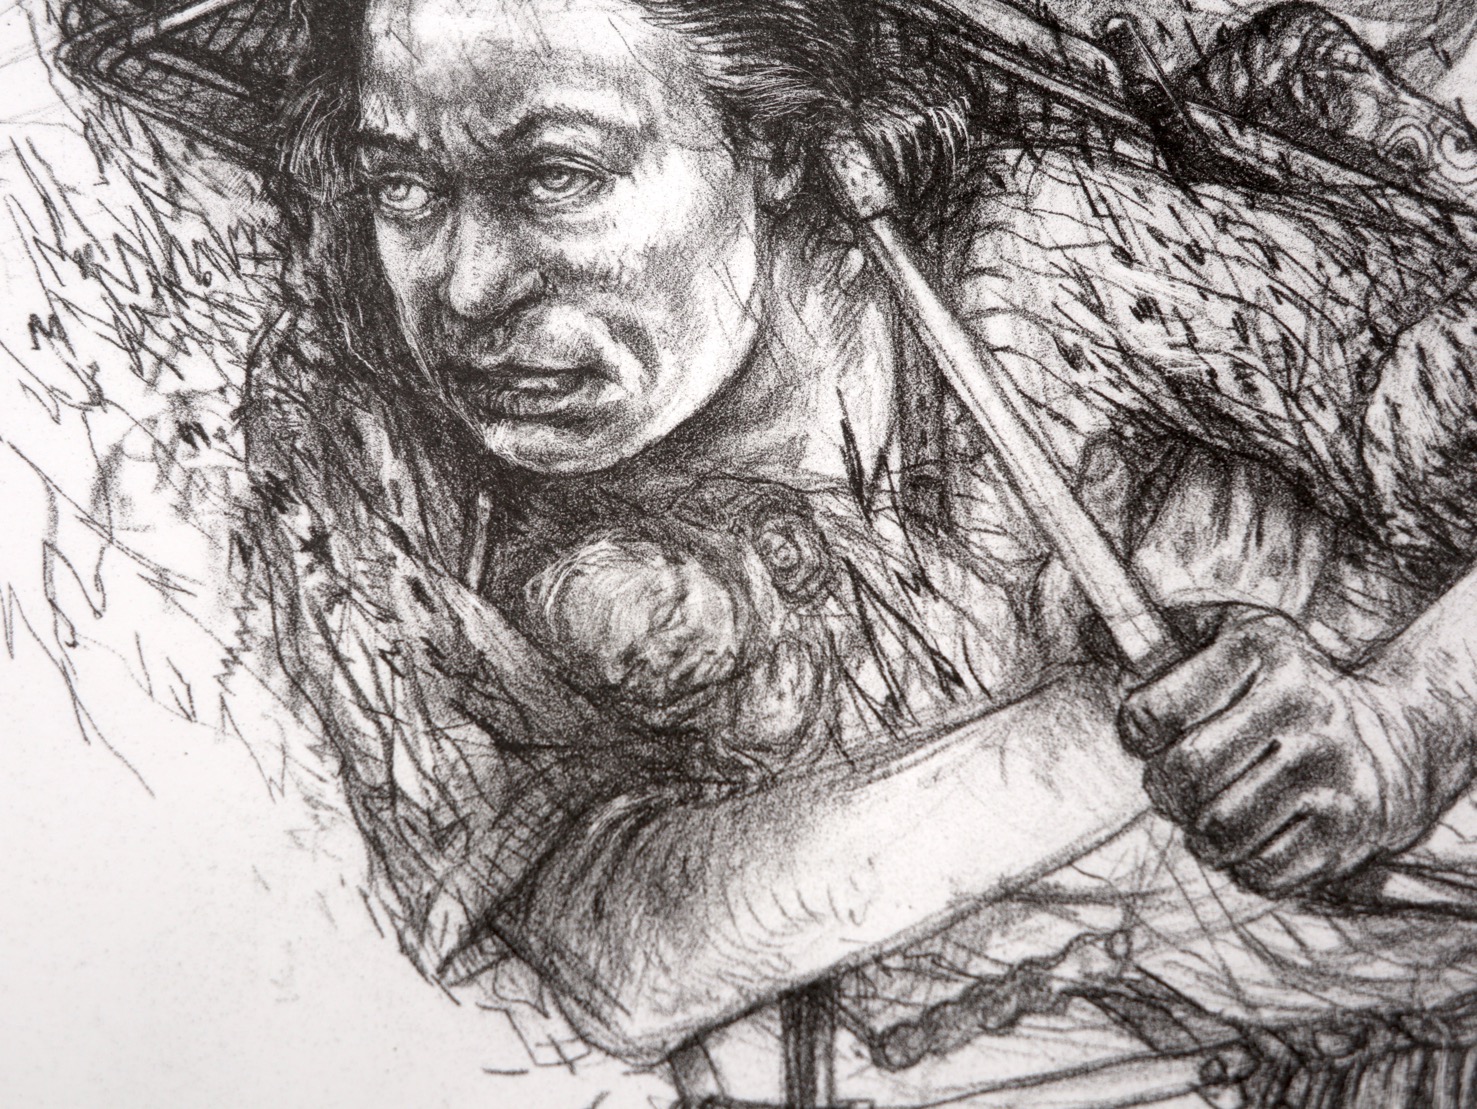 Detail of Surveying the Terrain print showing woman's face with a baby tucked against her chest